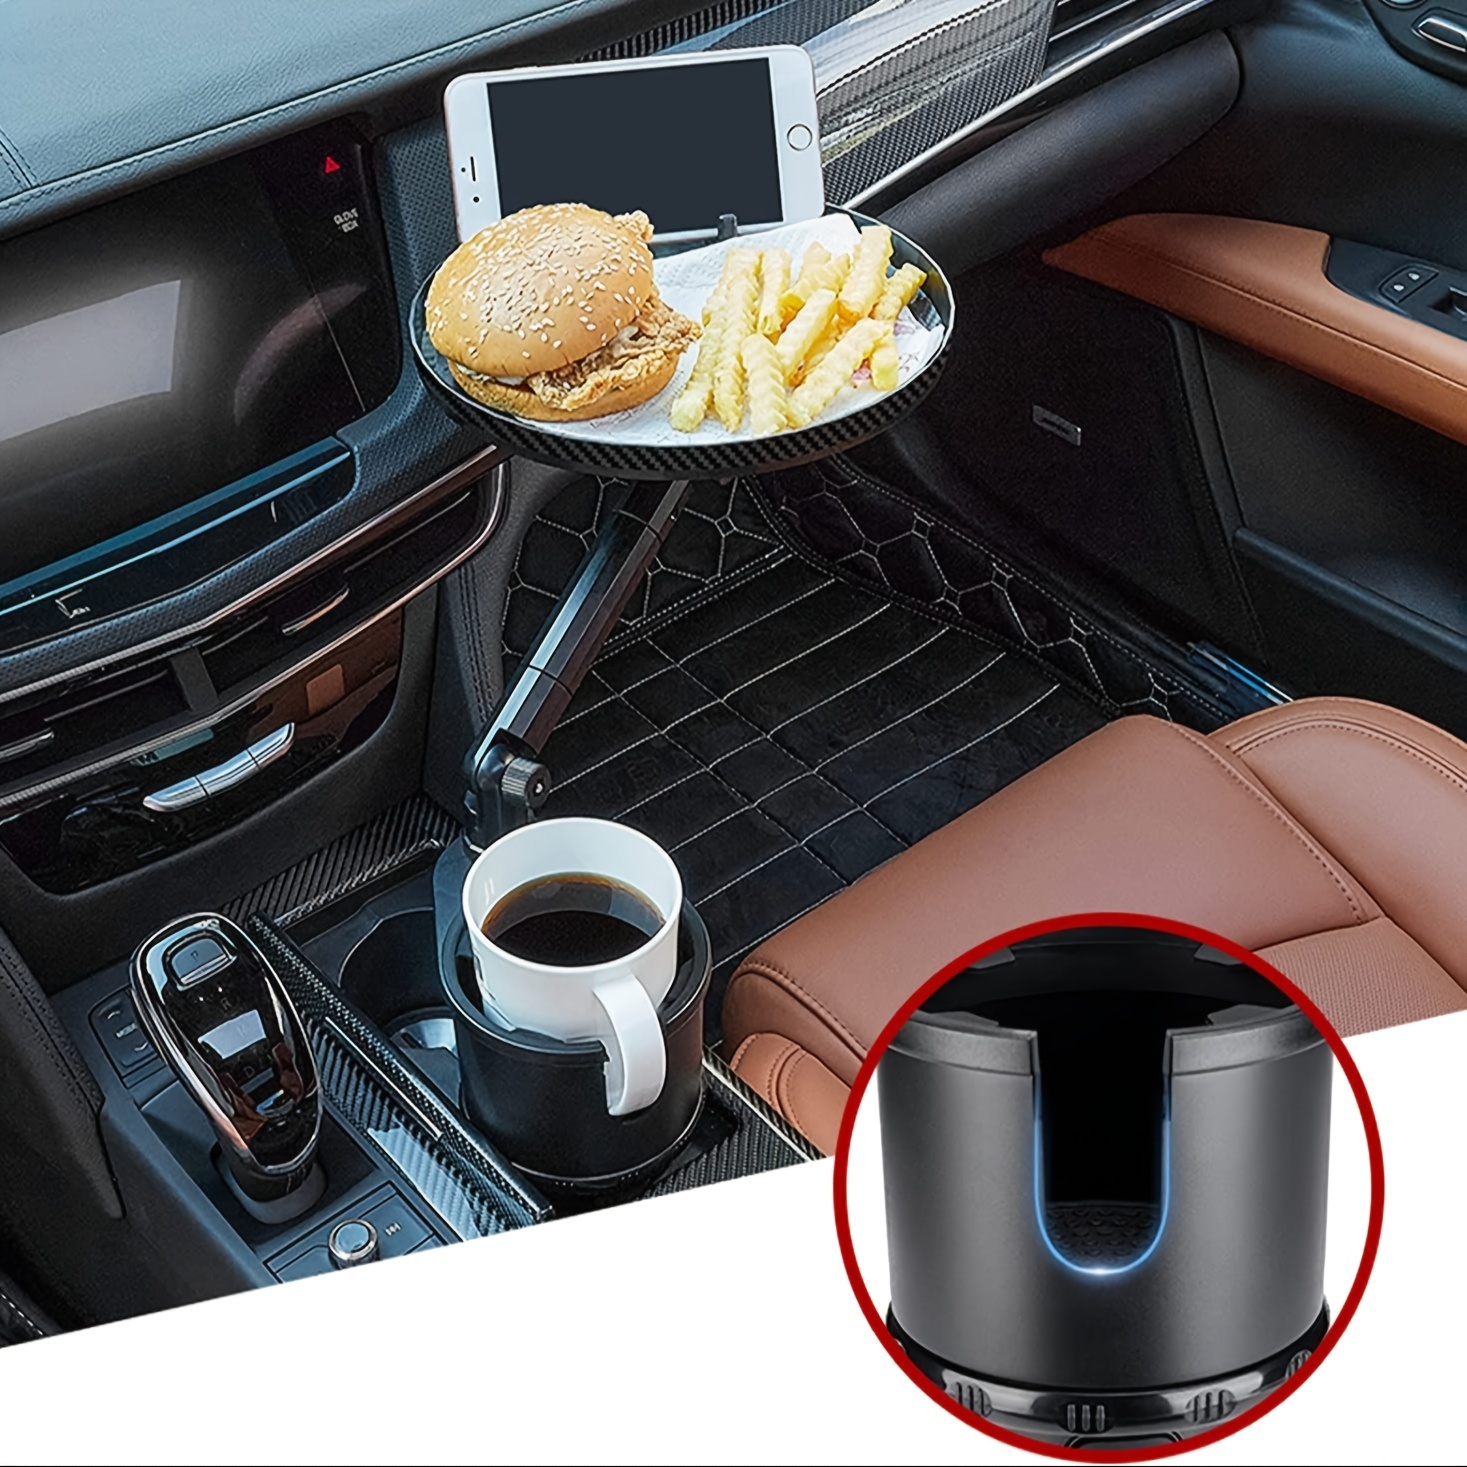  ENQINN 2 in 1 Car Cup Holder Expander Phone Holder Mount with  Offset Base Compatible with iPhone Samsung All Smartphones and Hydro Flask  32/40 oz Yeti Ramblers 20/26/30/36 oz : Cell Phones & Accessories